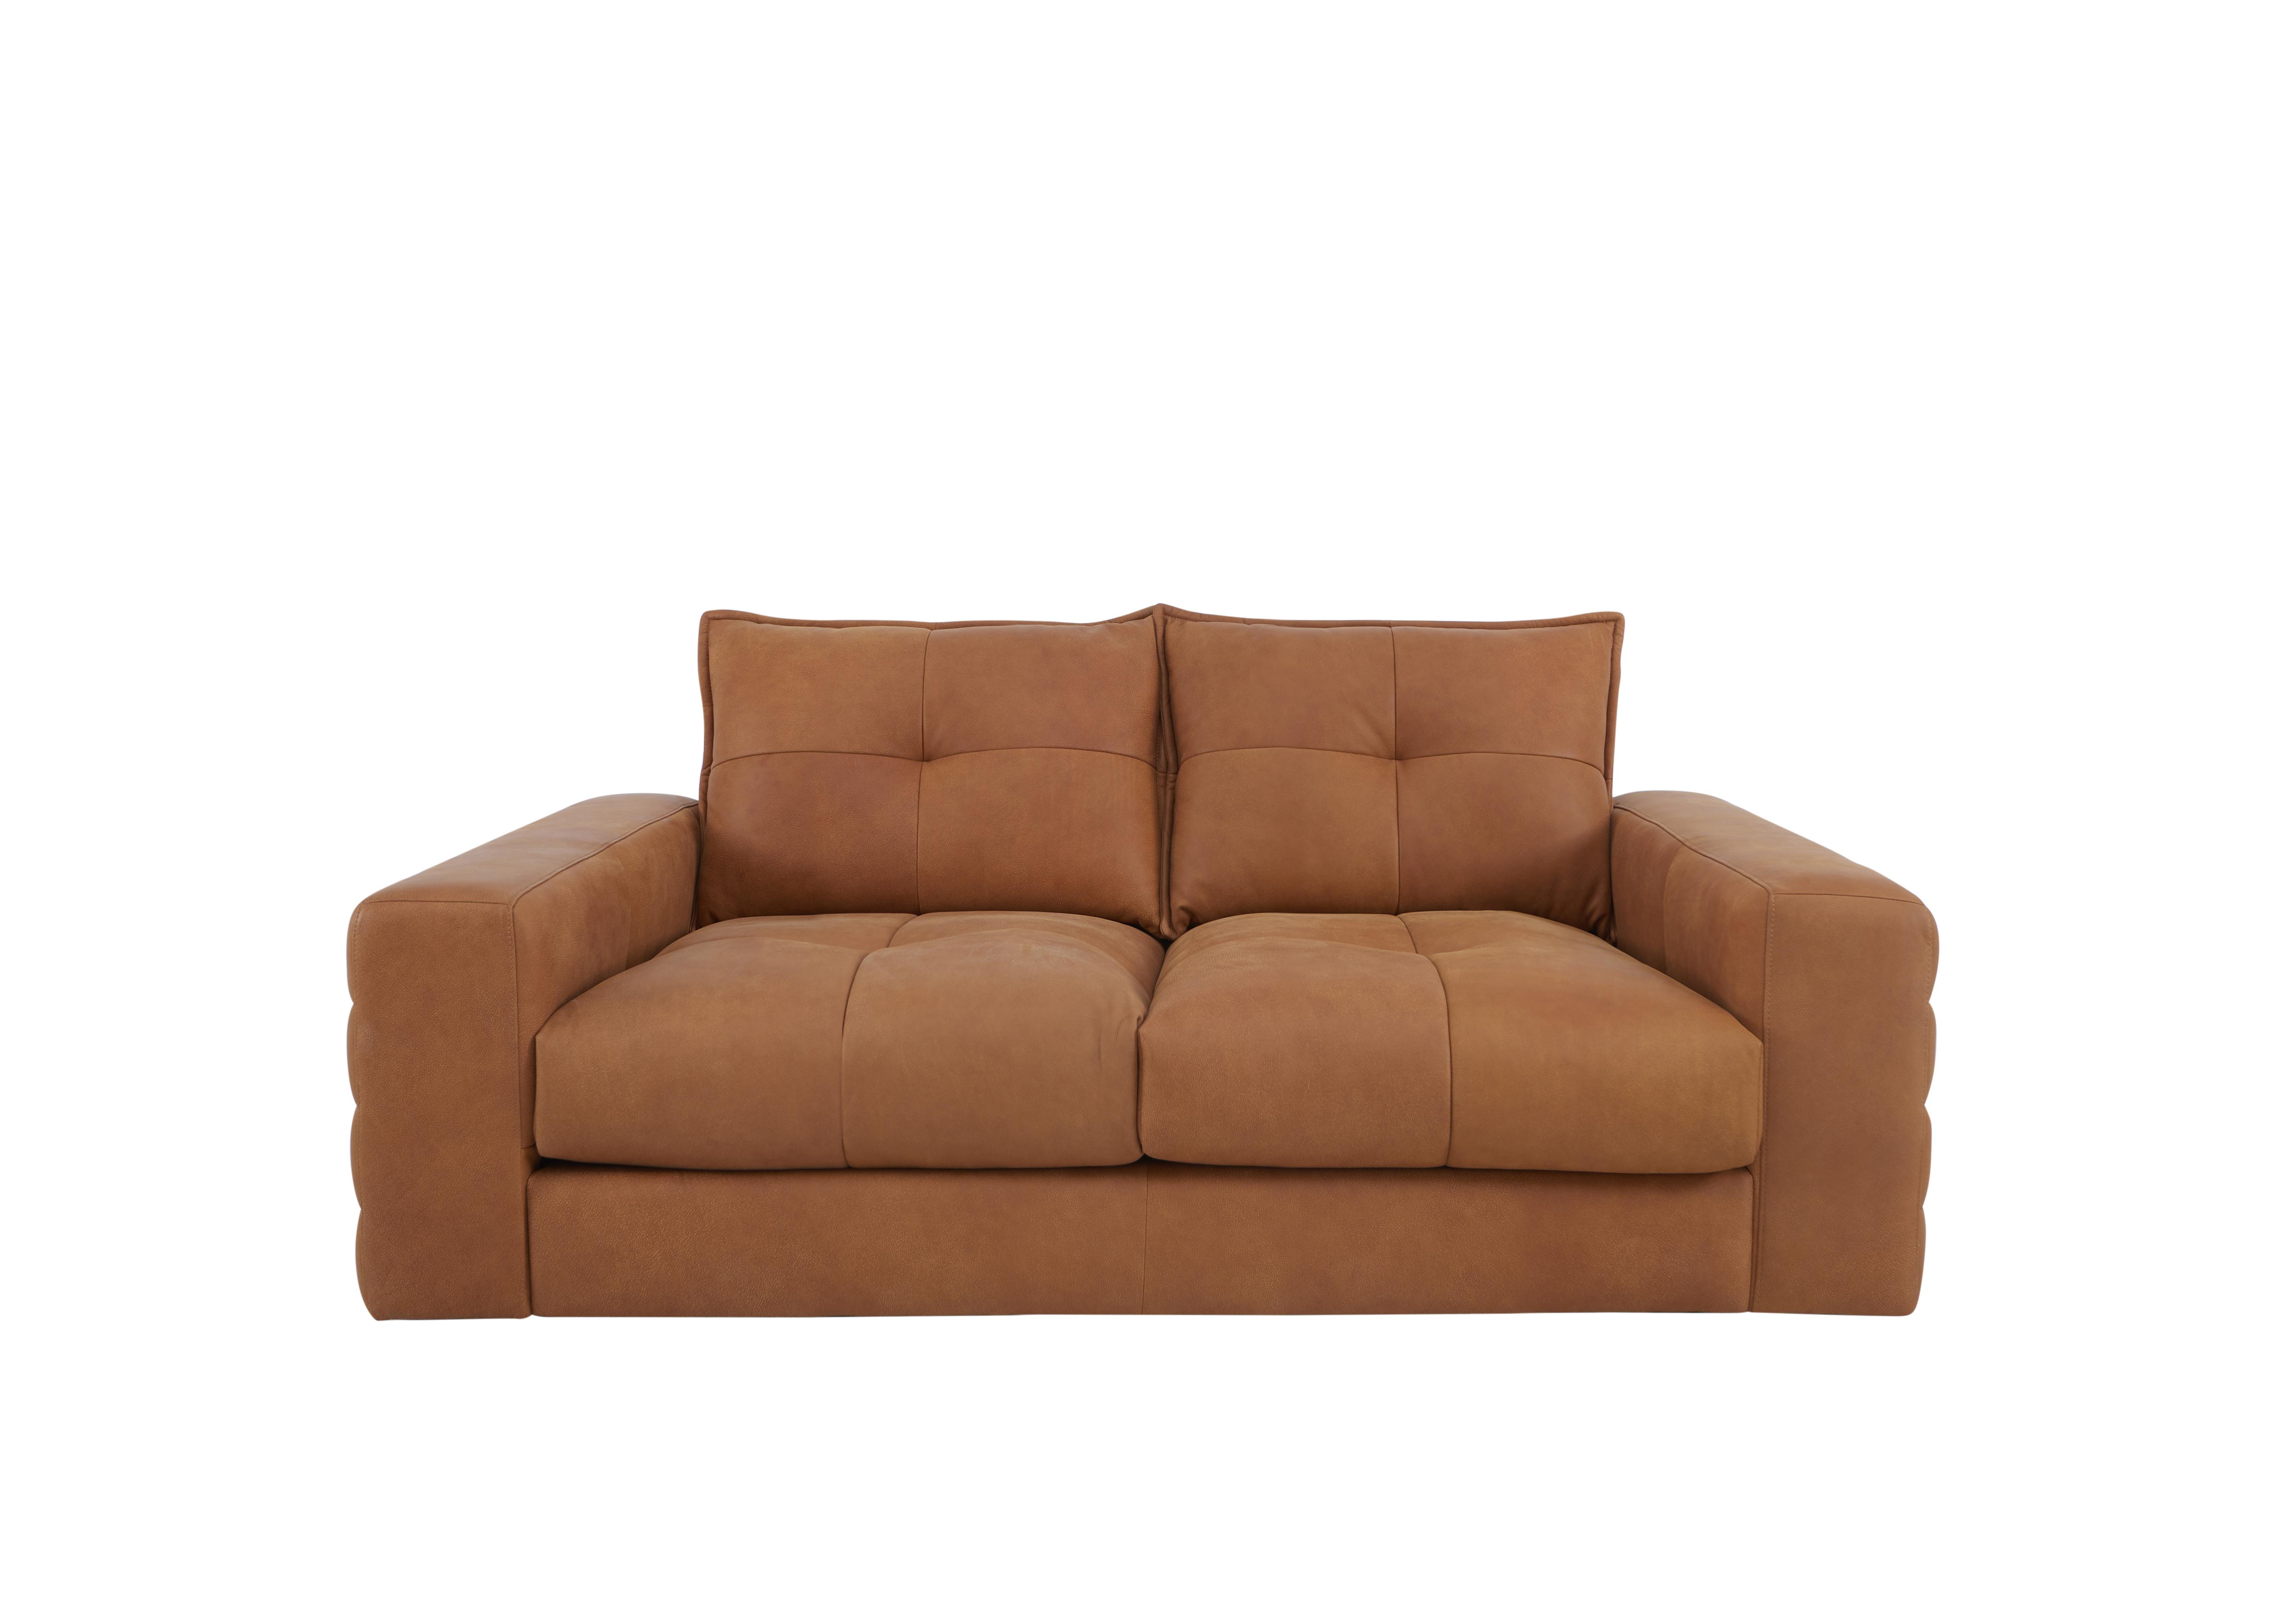 Boutique Brando 2 Seater Leather Sofa in Stone Washed Tan on Furniture Village